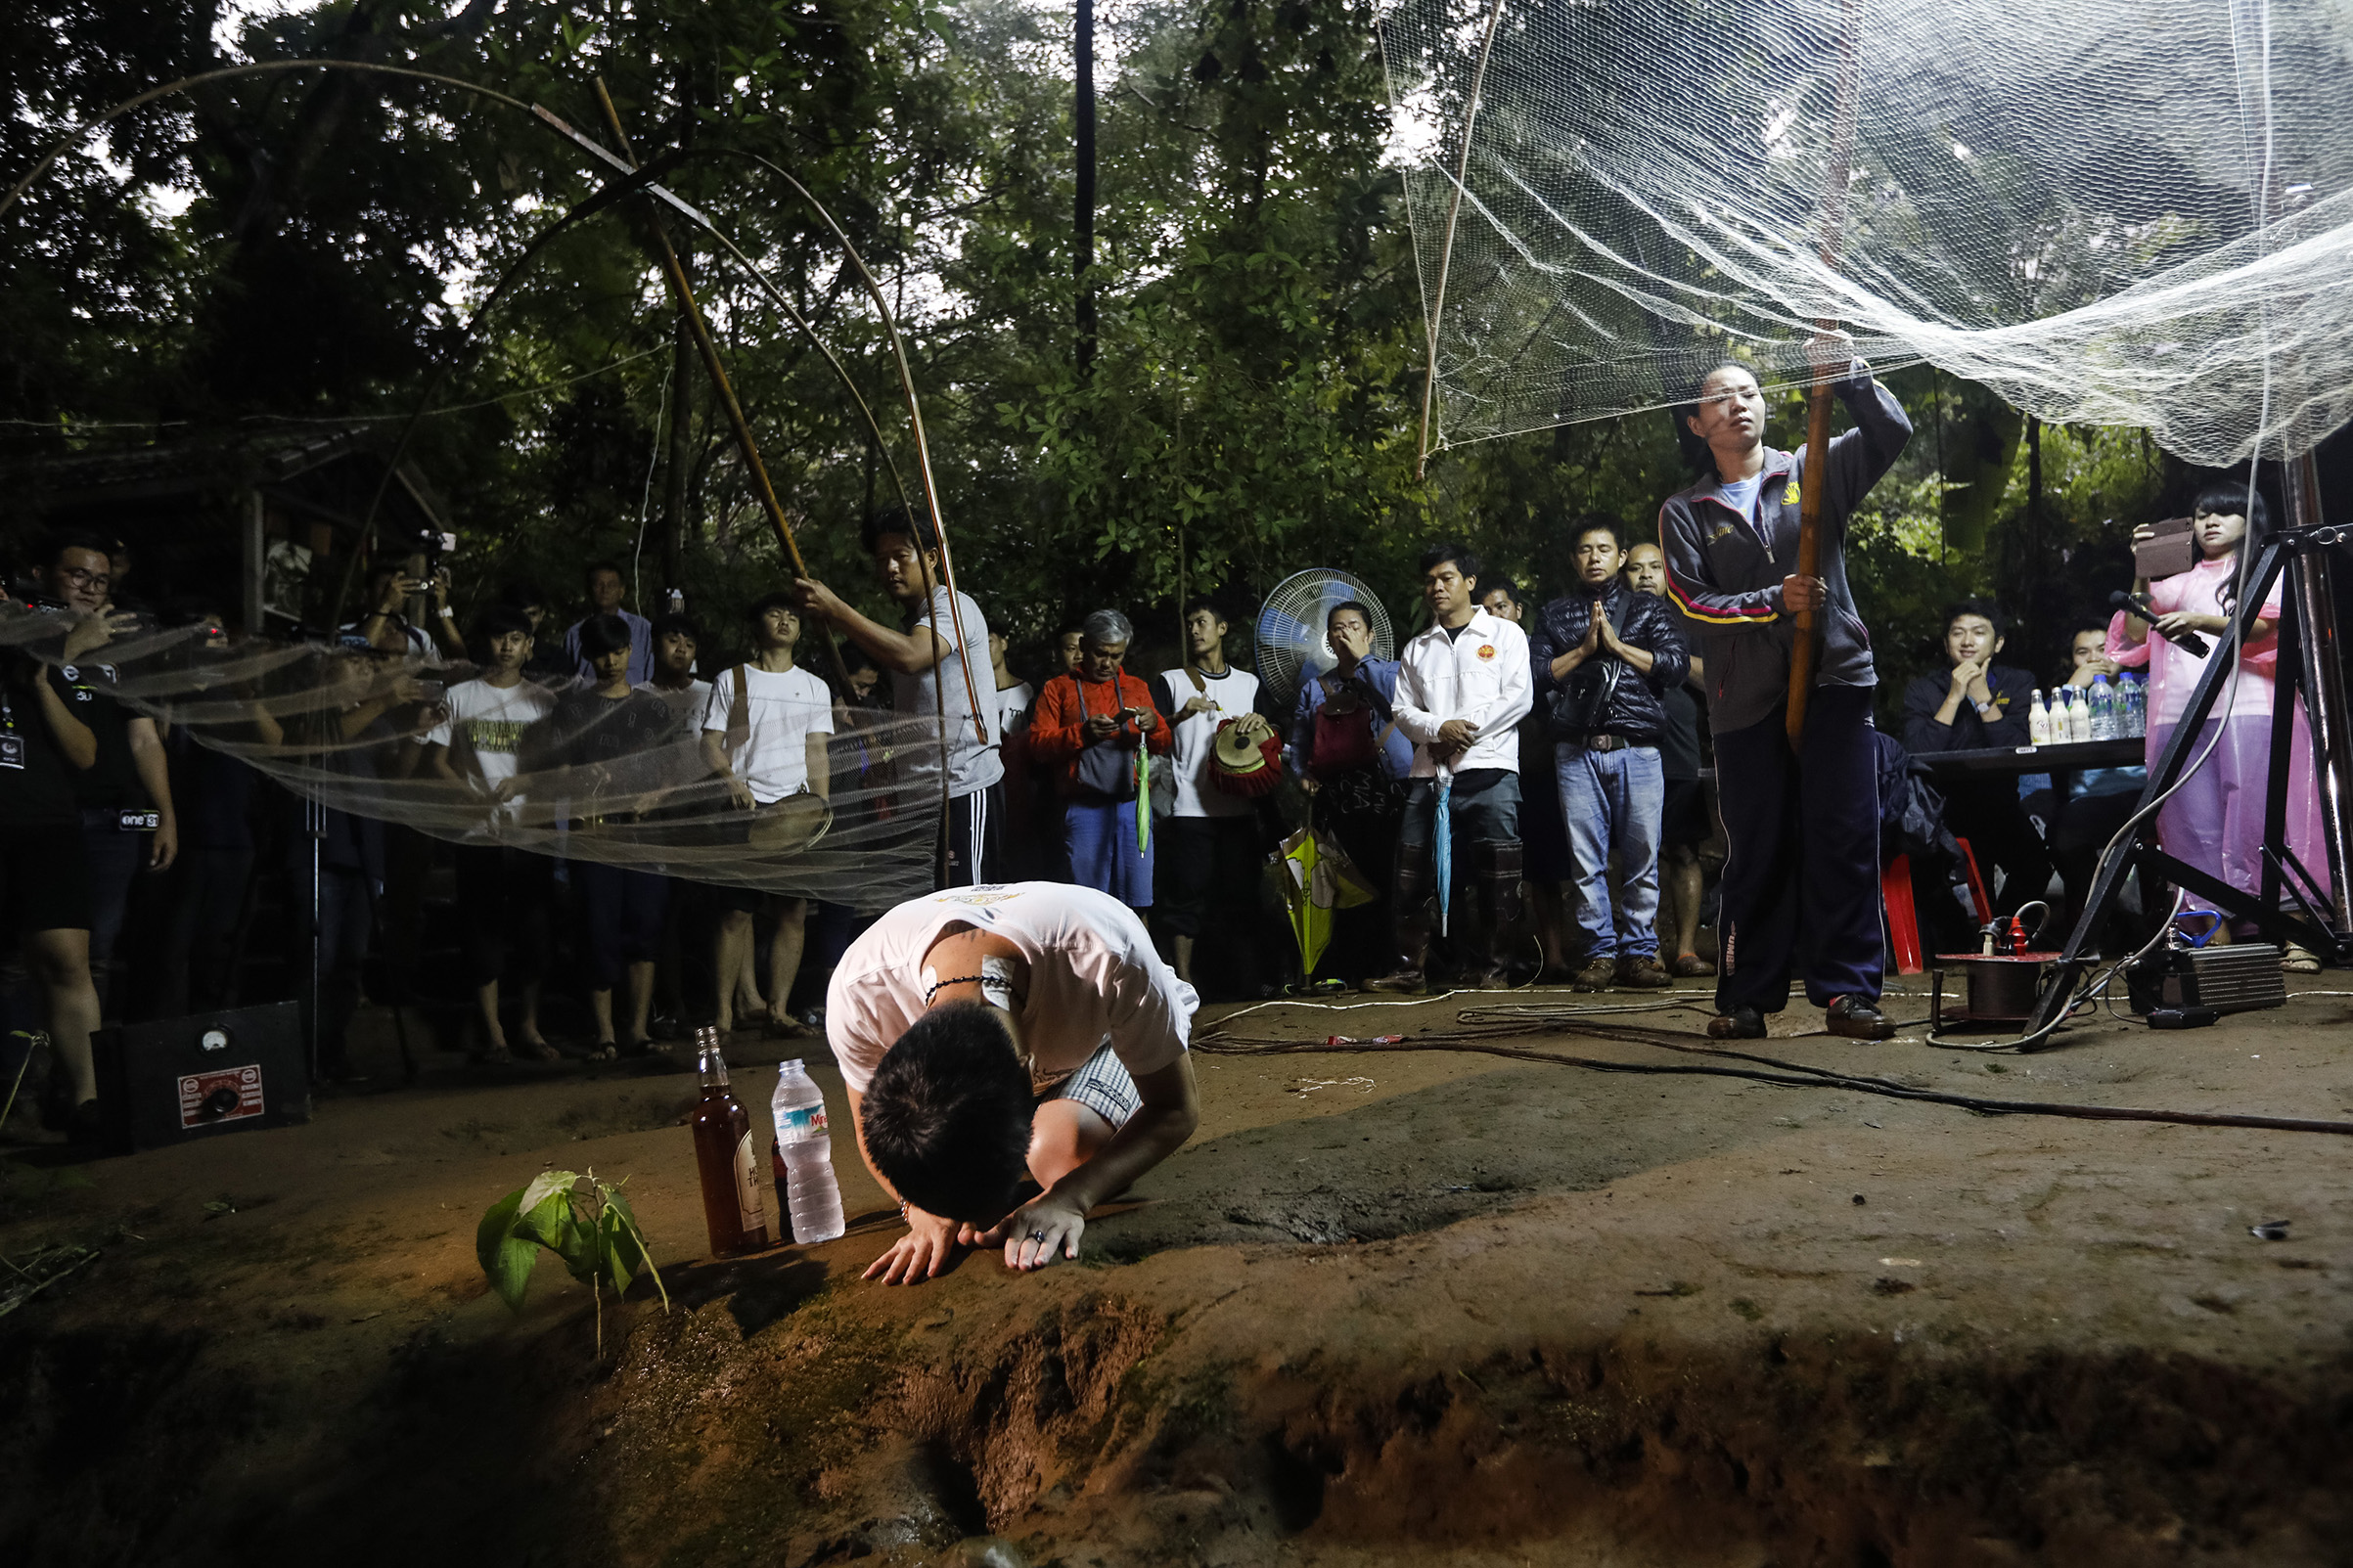 Family members and relatives pray at the entrance of Tham Luang cave while rescue personnel conduct operations to find the missing members of the children's football team along with their coach at the cave in Khun Nam Nang Non Forest Park in Chiang Rai province on June 26, 2018. (Krit Phromsakla Na Sakolnakorn—AFP/Getty Images)